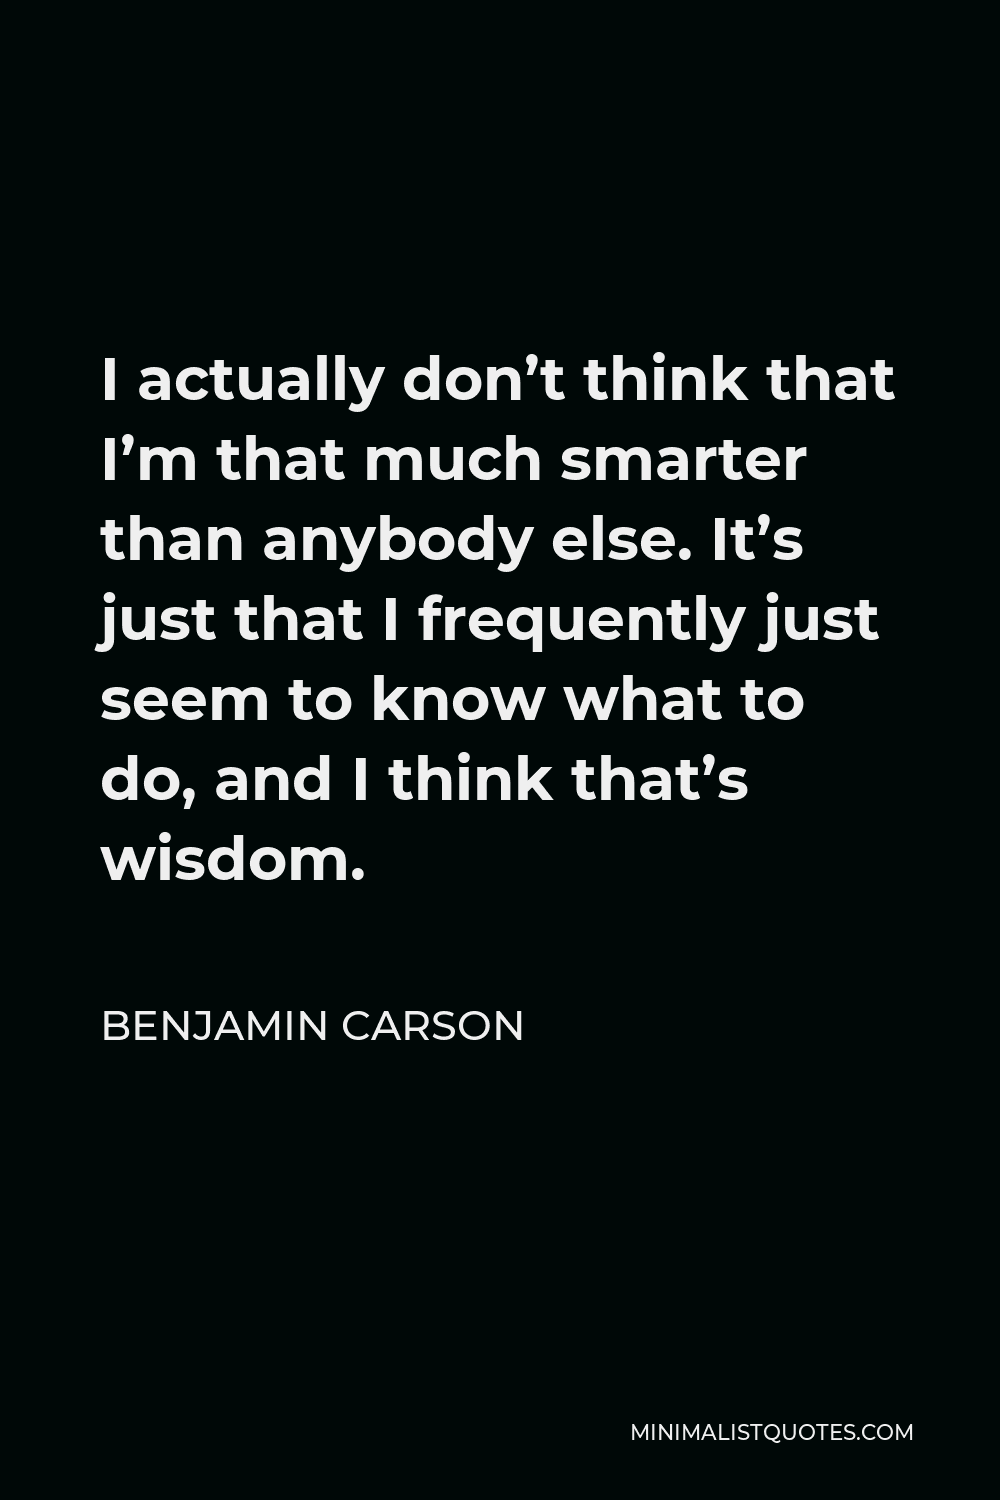 Benjamin Carson Quote - I actually don’t think that I’m that much smarter than anybody else. It’s just that I frequently just seem to know what to do, and I think that’s wisdom.